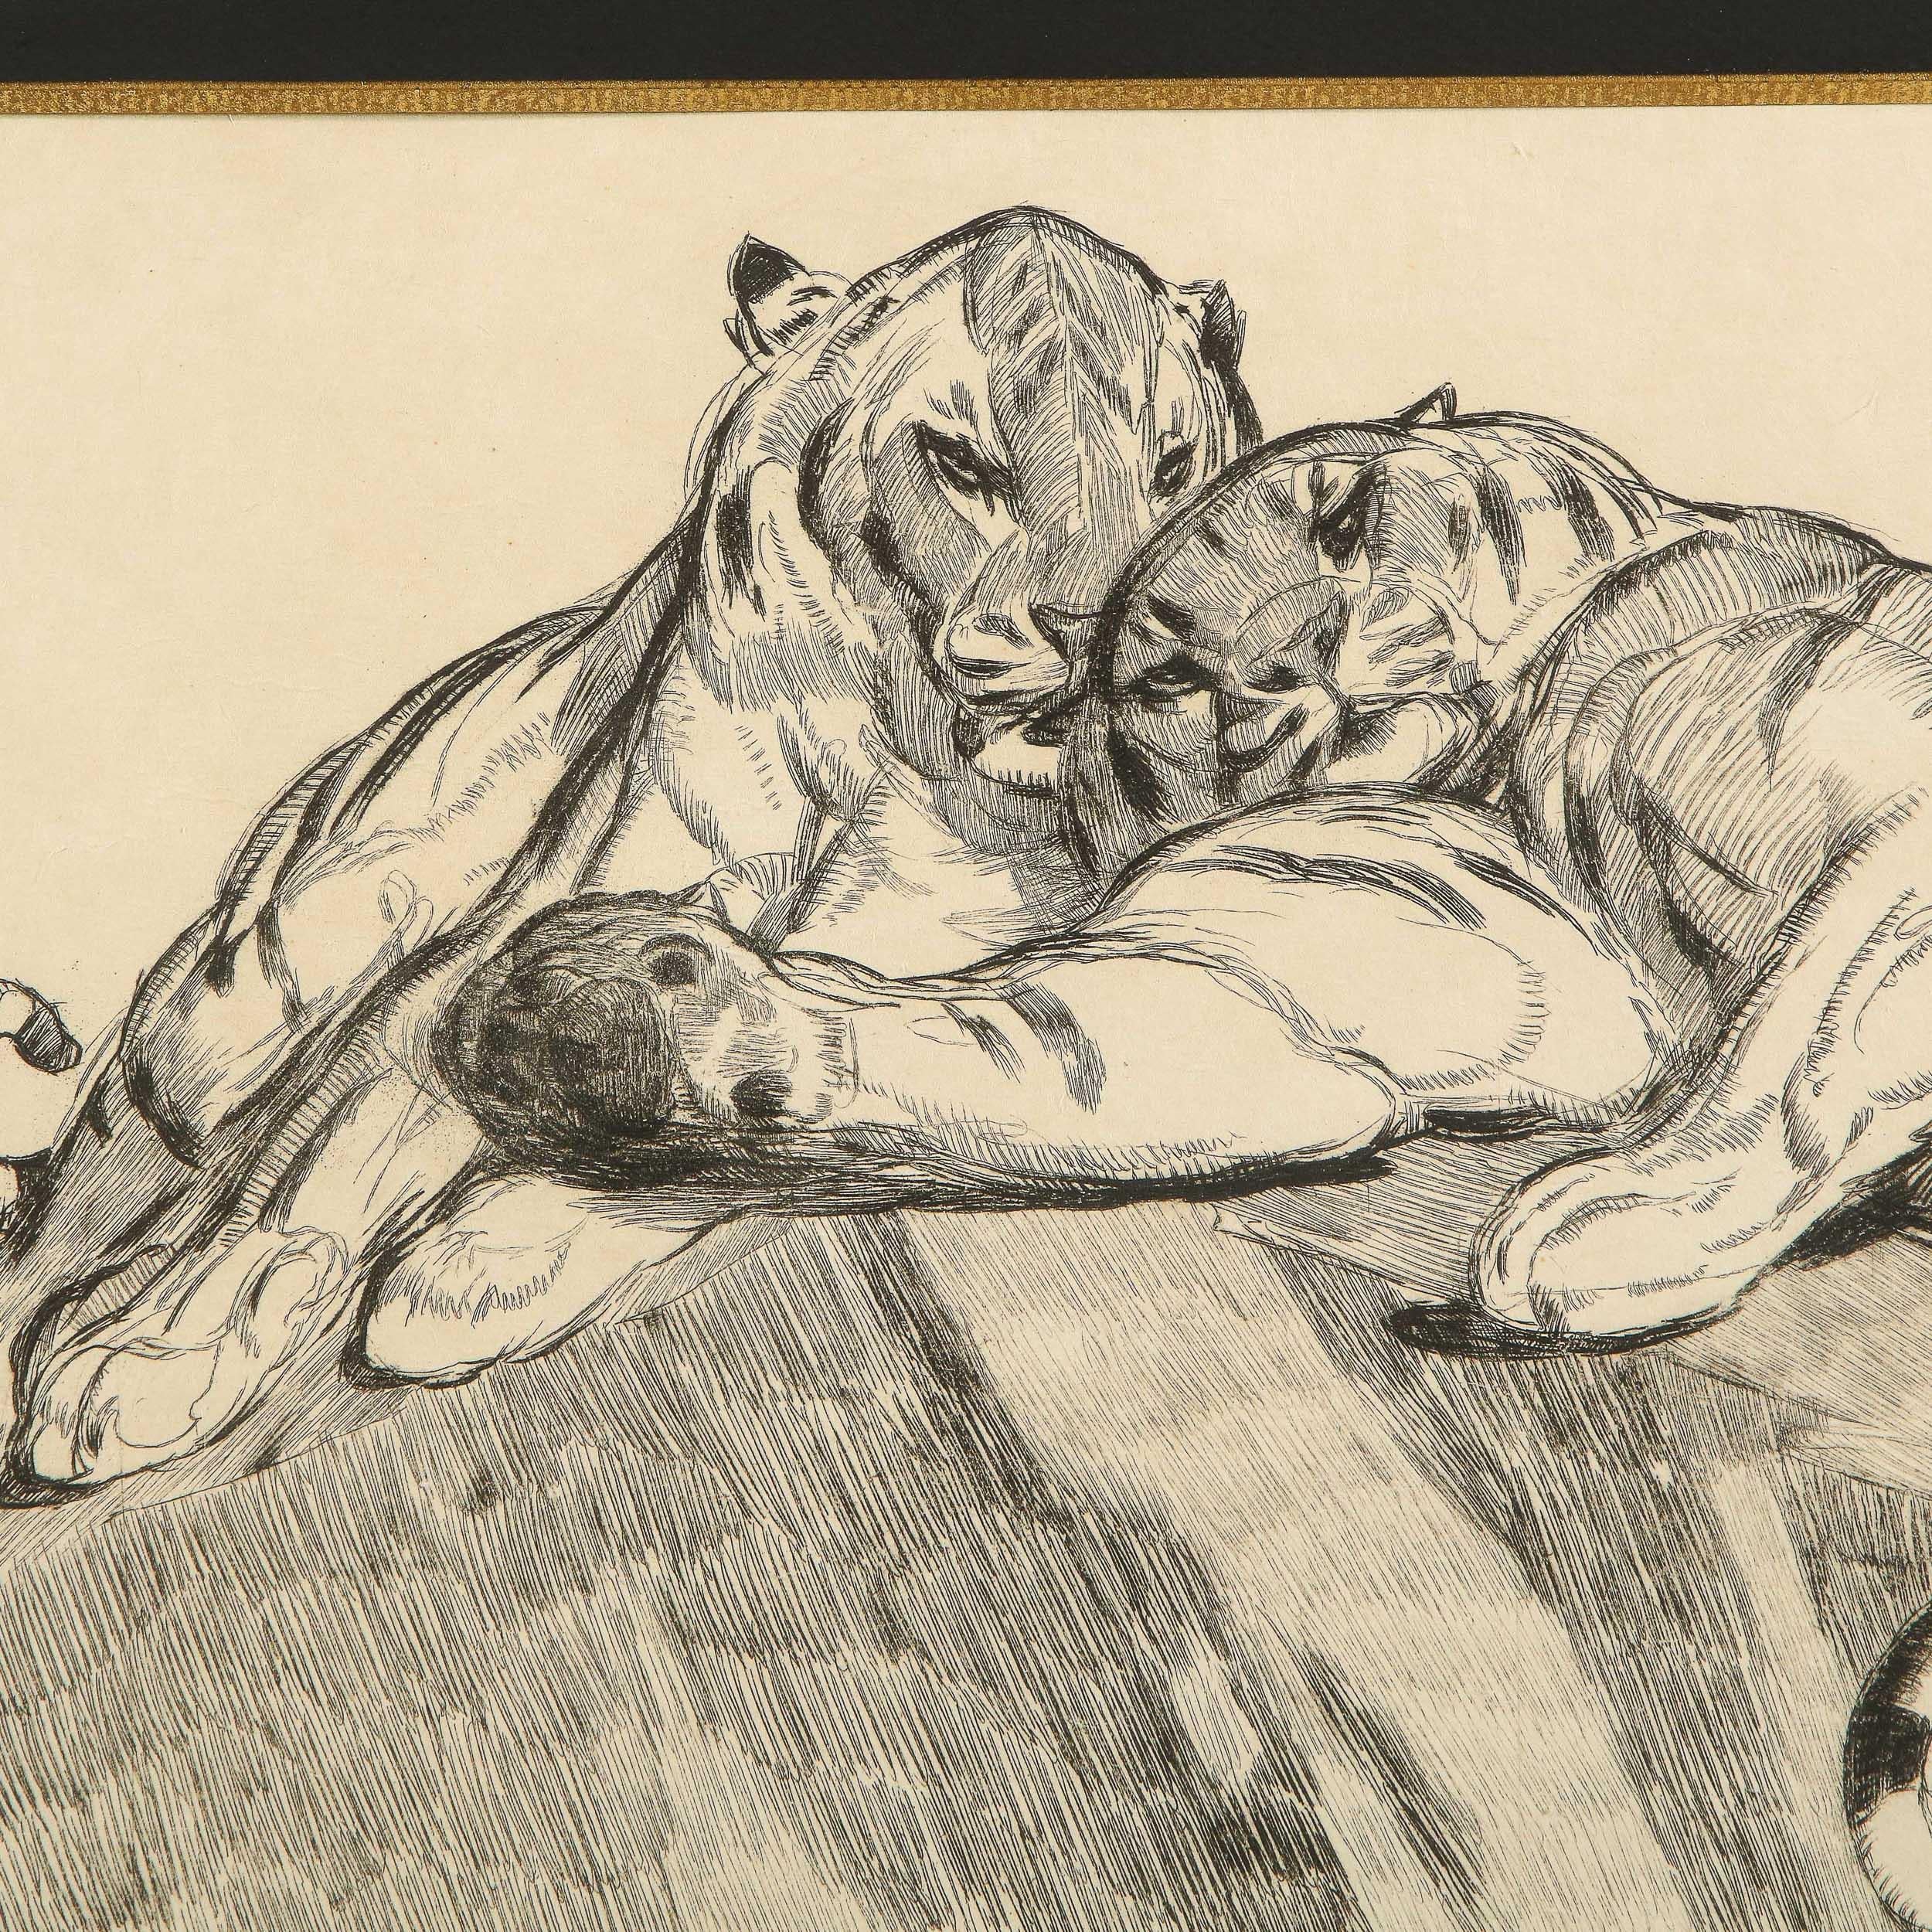 This original etching was executed by the master printmaker Paul Jouve in France, circa 1930. Entitled Tigers au repose